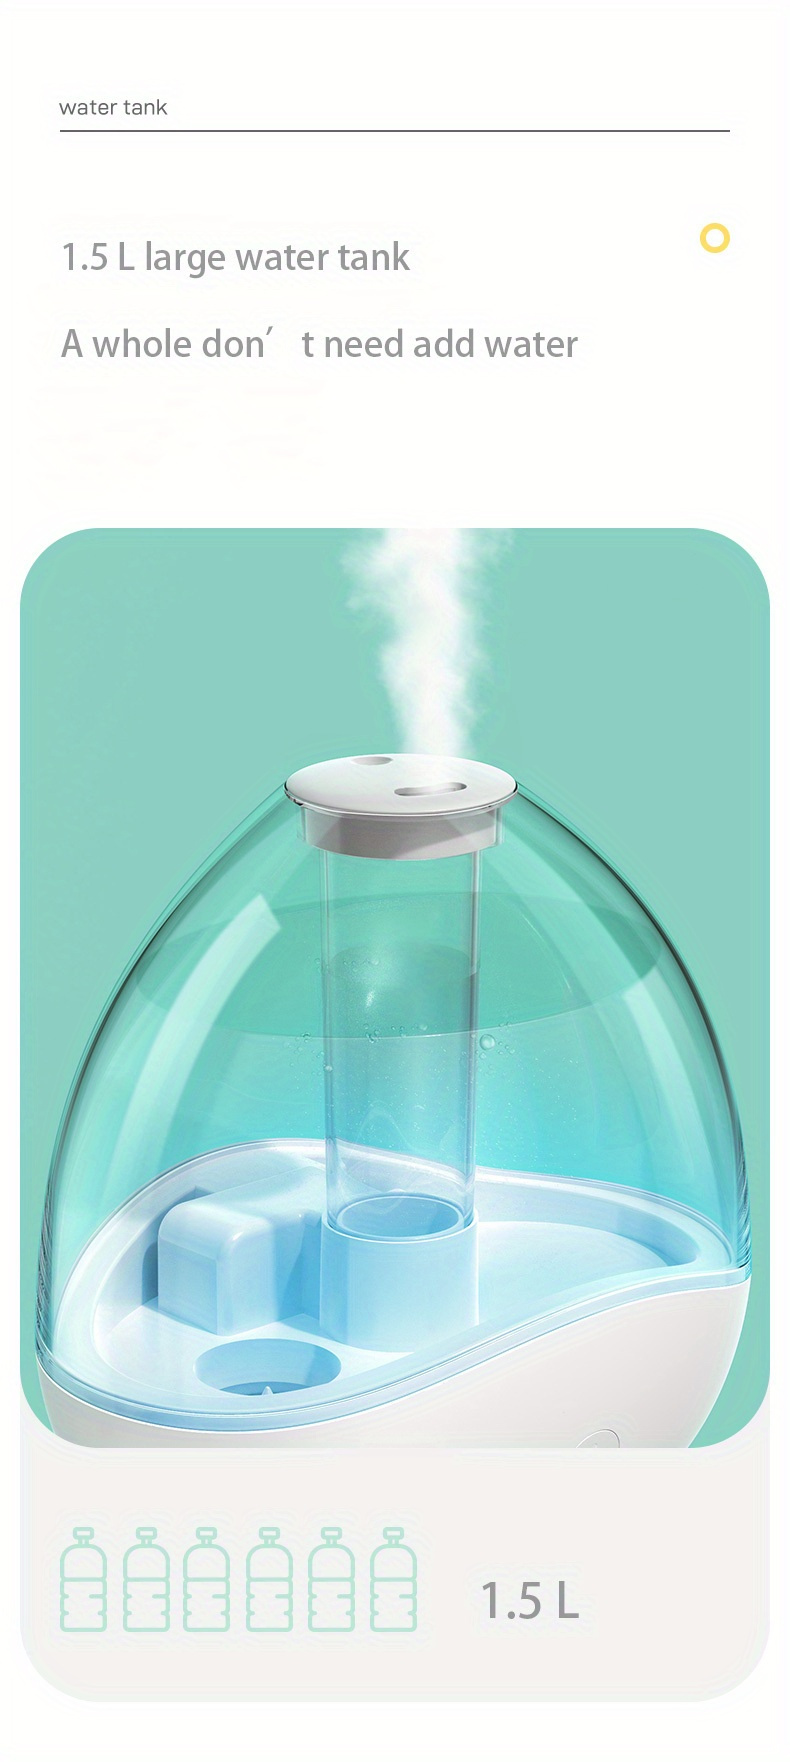 1 5l large capacity clear water tank humidifier 360 degree nozzle portable cool mist usb 7 colors glow in the dark ultrasonic h2o air humidifier aromather details 6